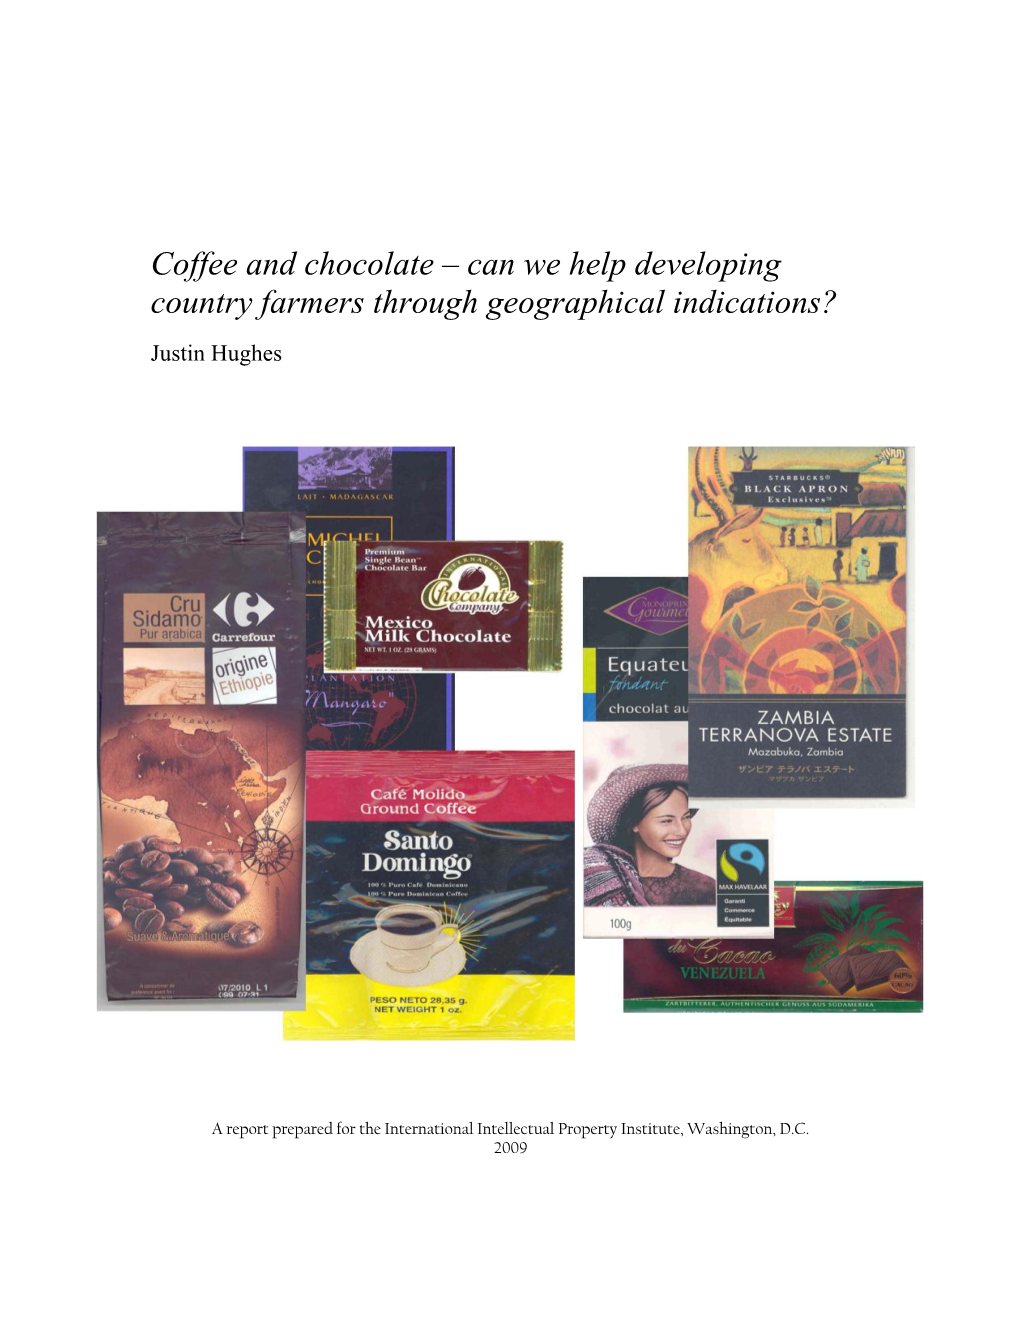 Coffee and Chocolate – Can We Help Developing Country Farmers Through Geographical Indications?